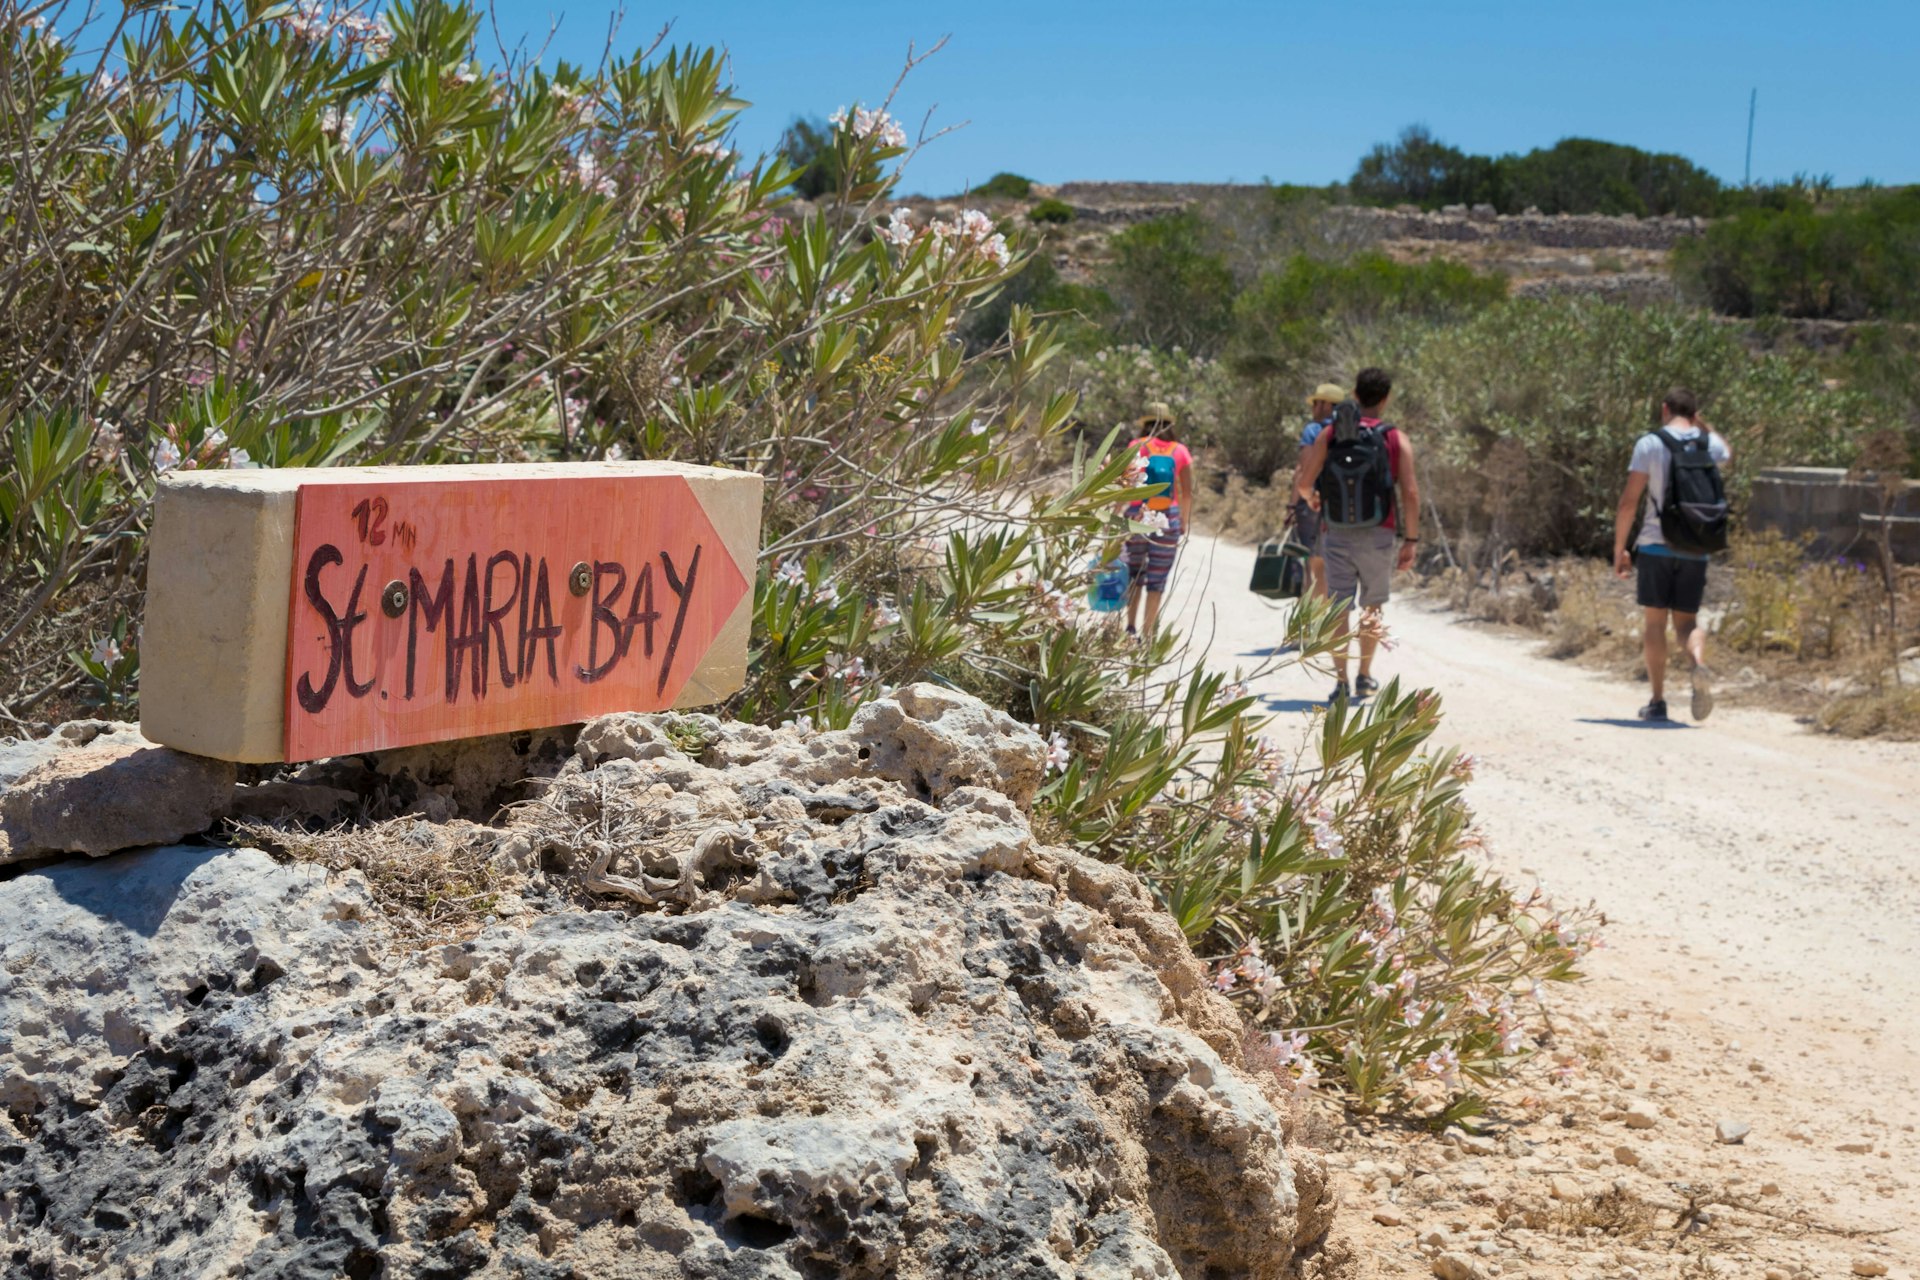 Young tourists walking along the path to St. Maria Bay and beach, through the wild countryside of Comino Island in the summer